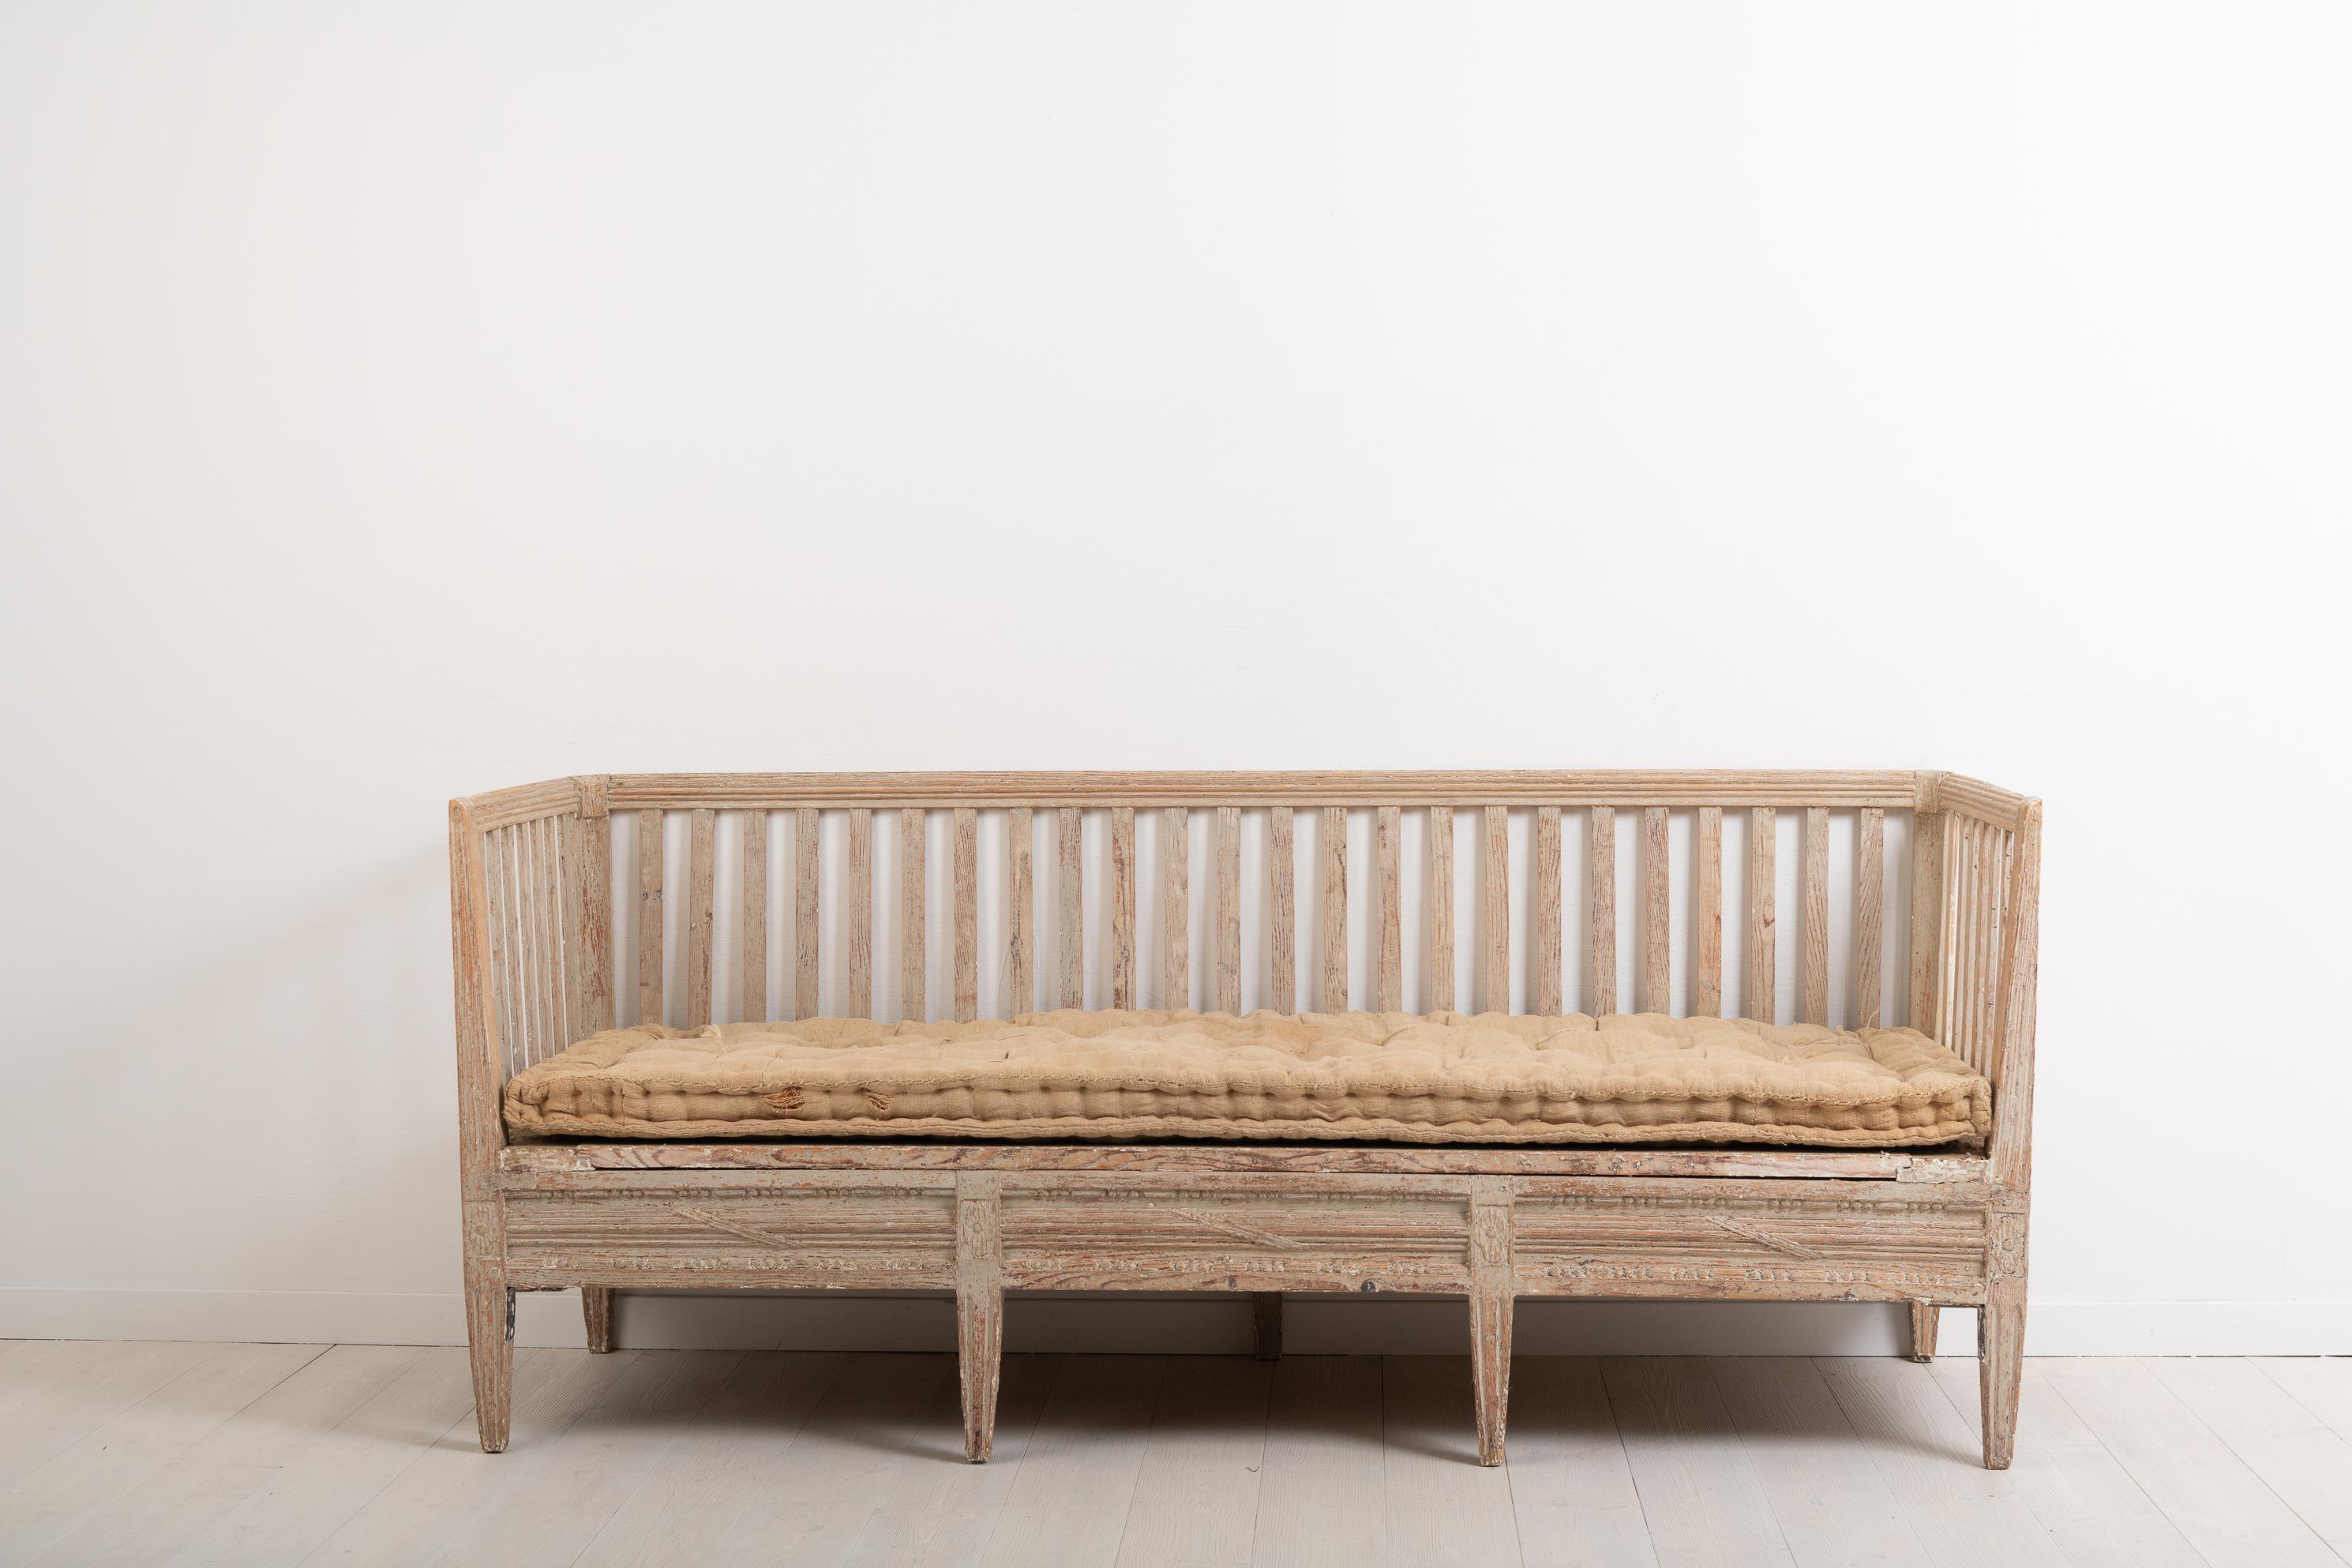 Antique sofa bench from the late 18th century. The bench is neoclassic and made in Sweden circa 1770. It is decorated with carved wooden decorations typical for the neoclassic period. Original and distressed paint from the 1770s. Natural patina. One